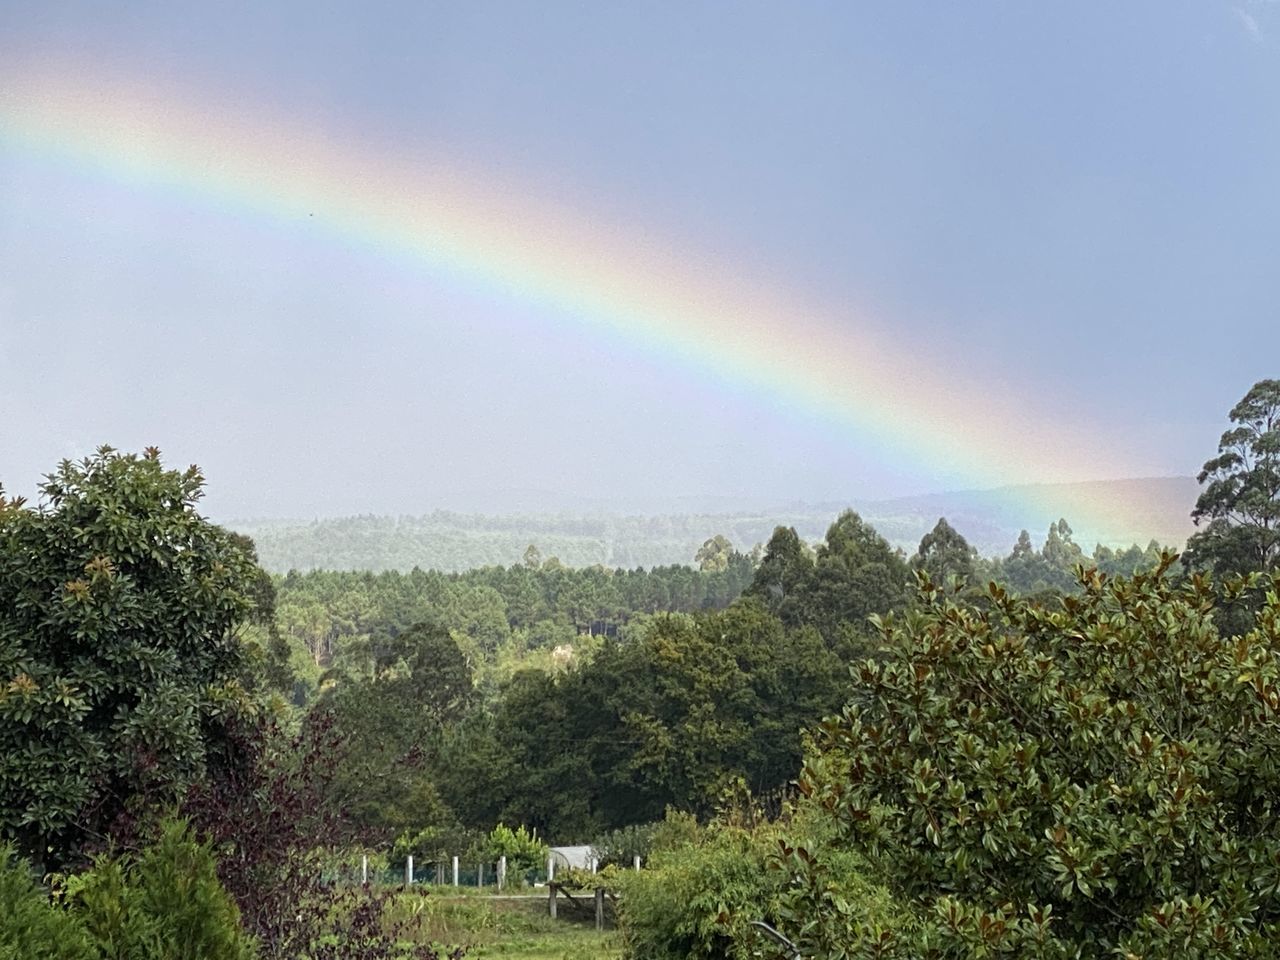 SCENIC VIEW OF RAINBOW OVER TREES AND PLANTS